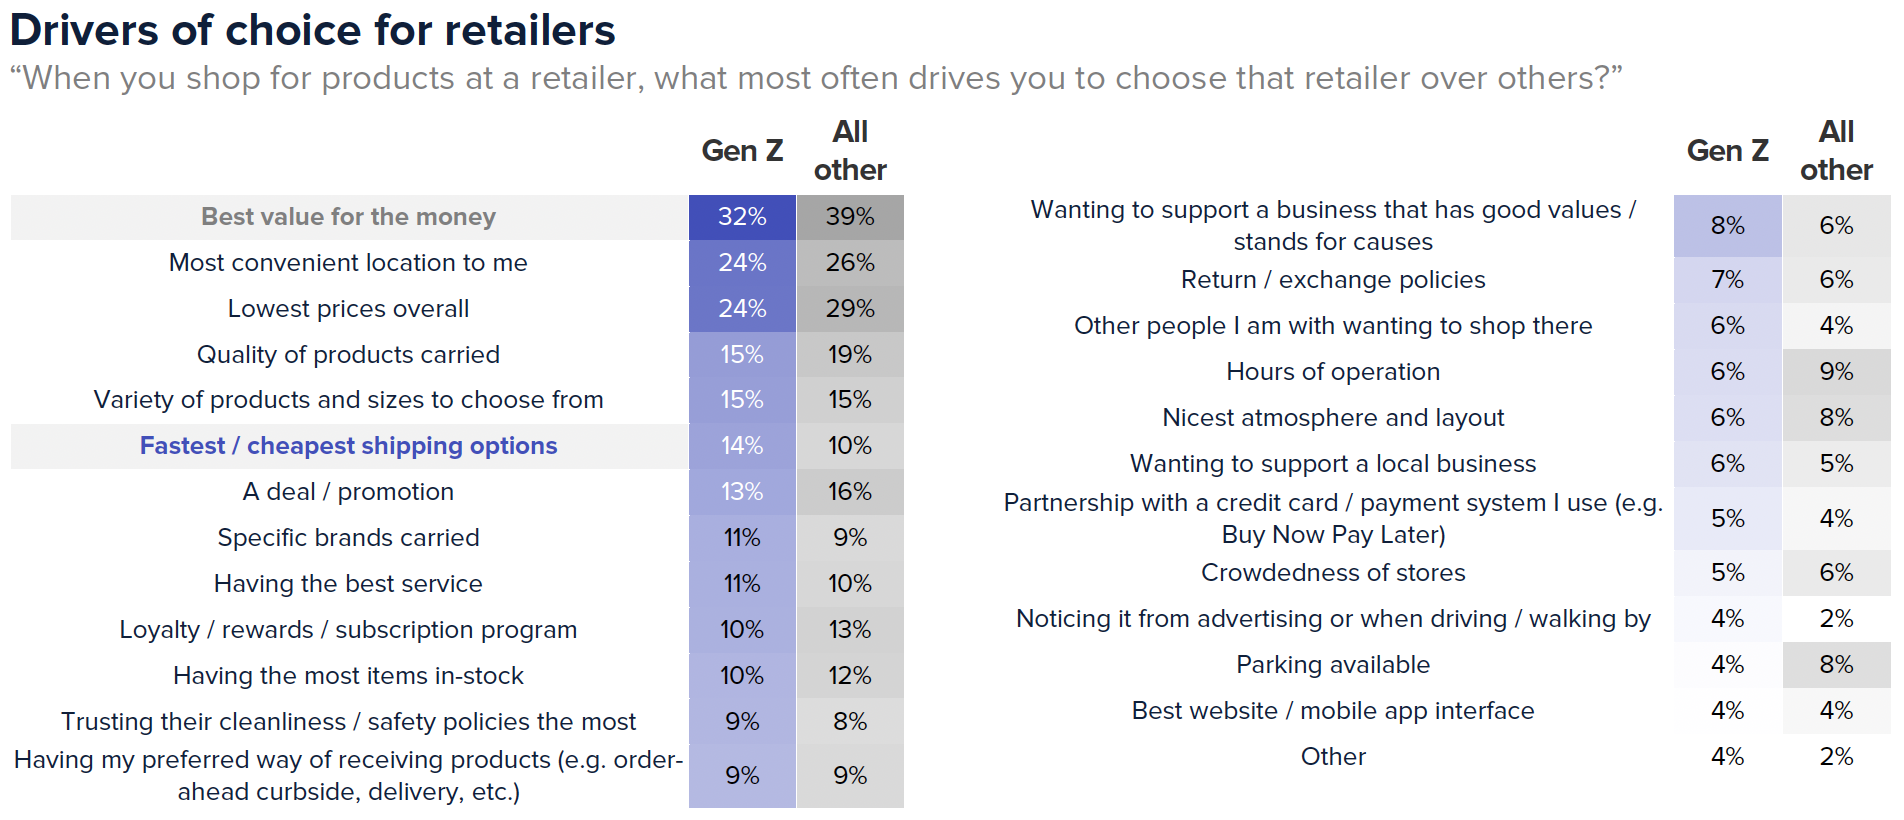 Drivers of choice for retailers. 32% of Gen Z is looking for best value for the money, and 24% are looking for “most convenient location to me.”